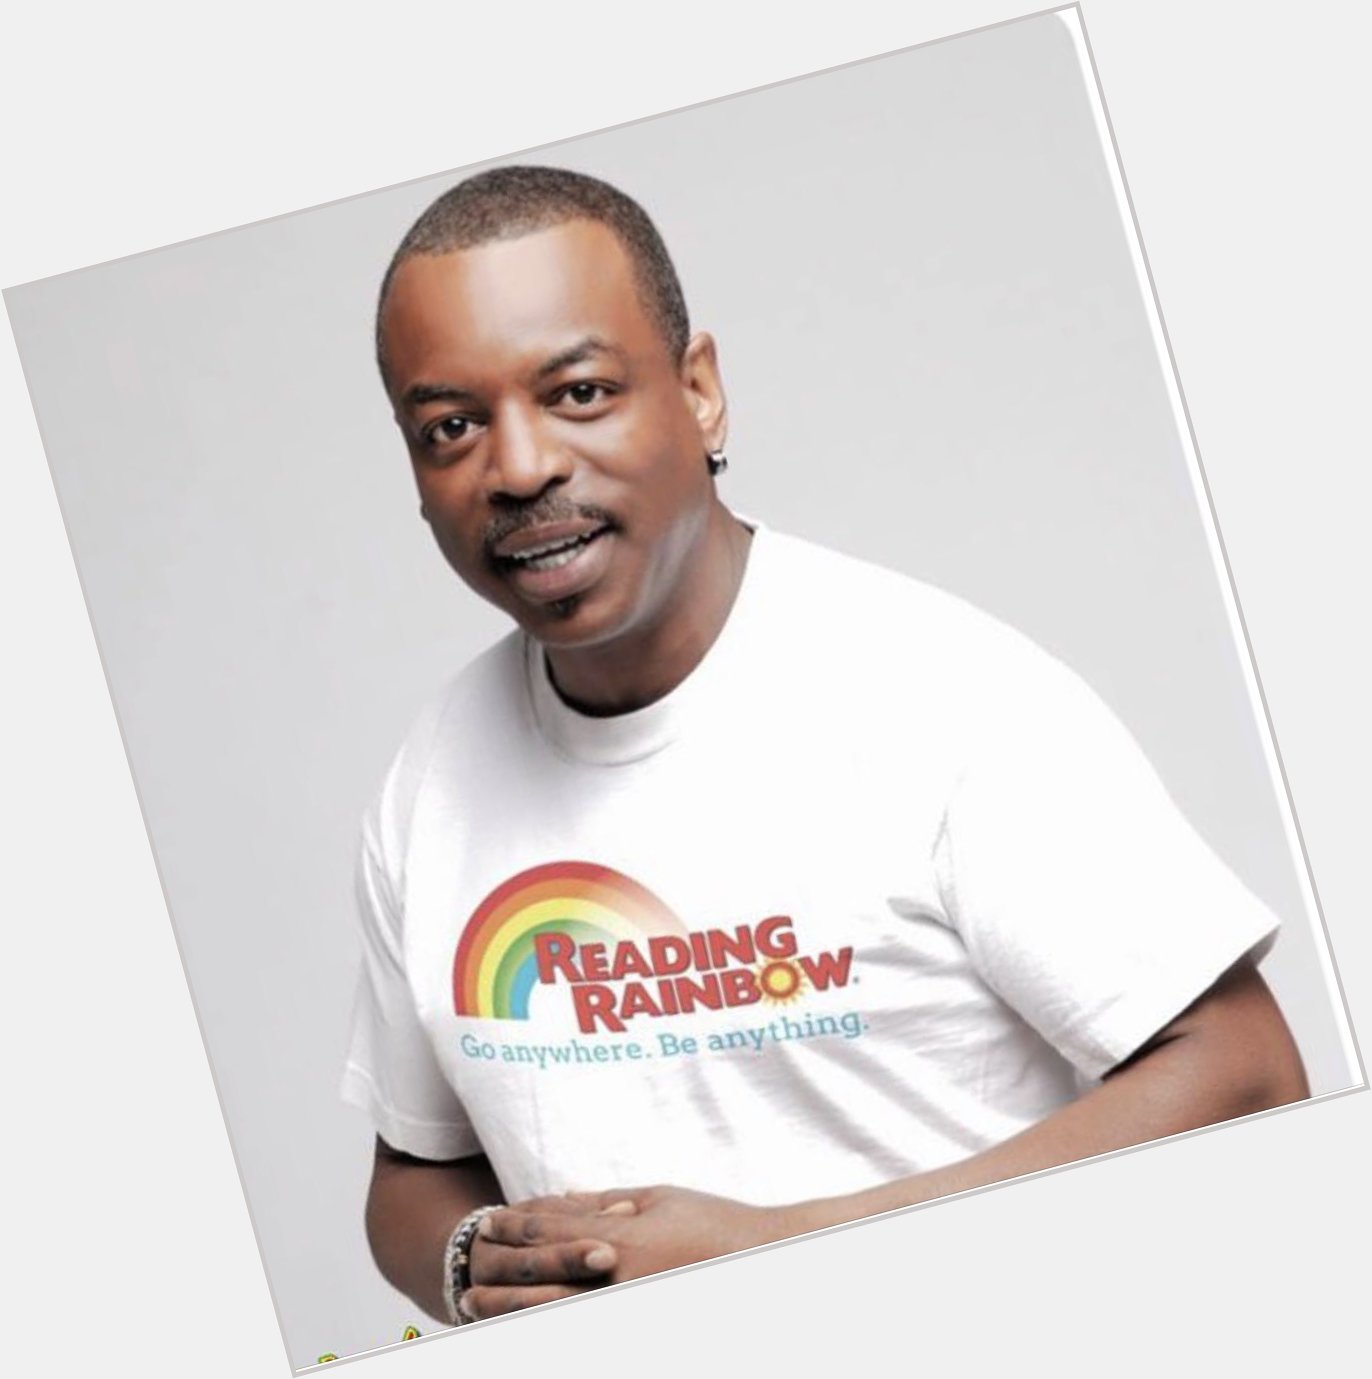 Happy Birthday To Levar Burton. Thanks for inspiring me to read when I was a child.    